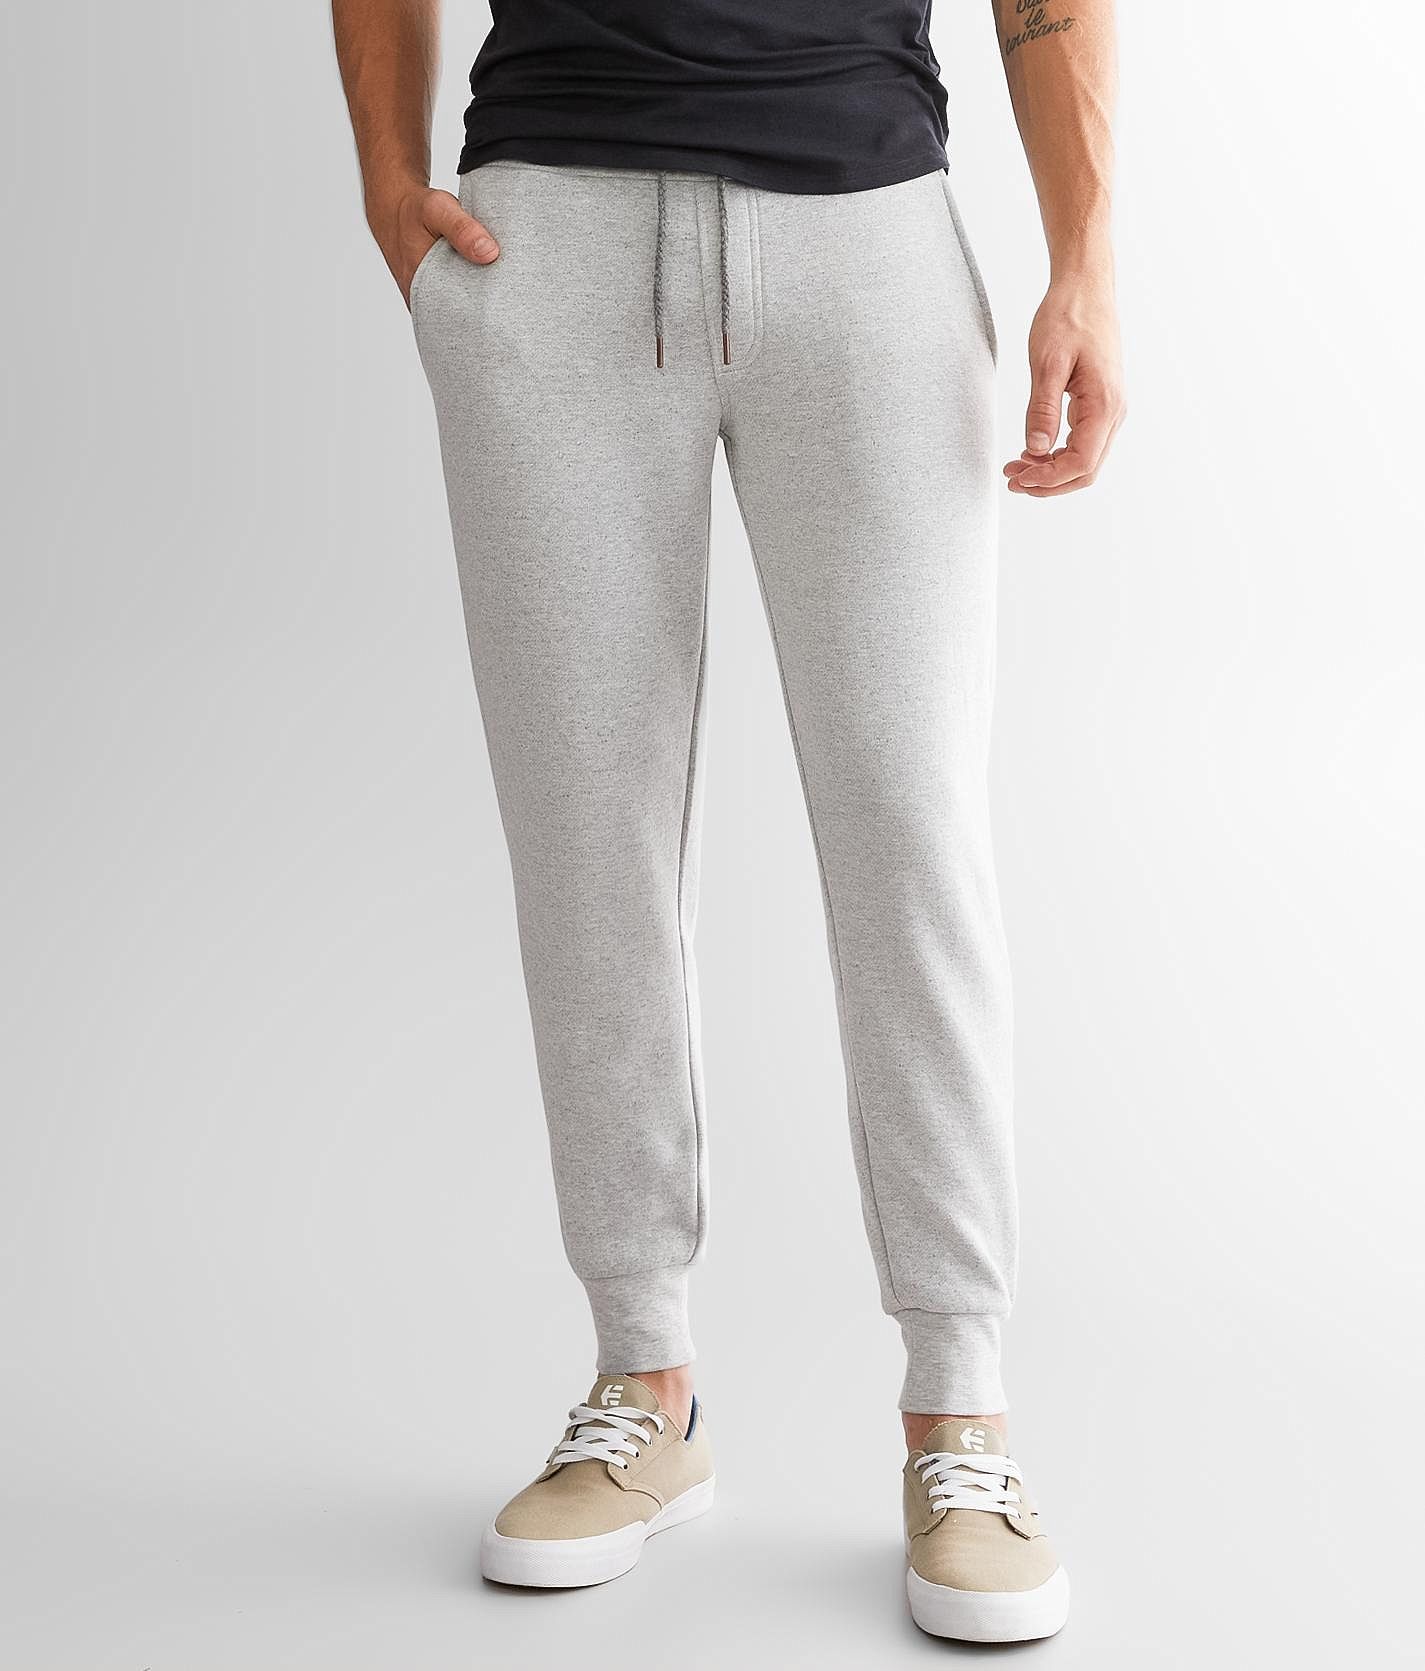 Departwest Twill Jogger Stretch Pant - Men's Pants in Light Grey